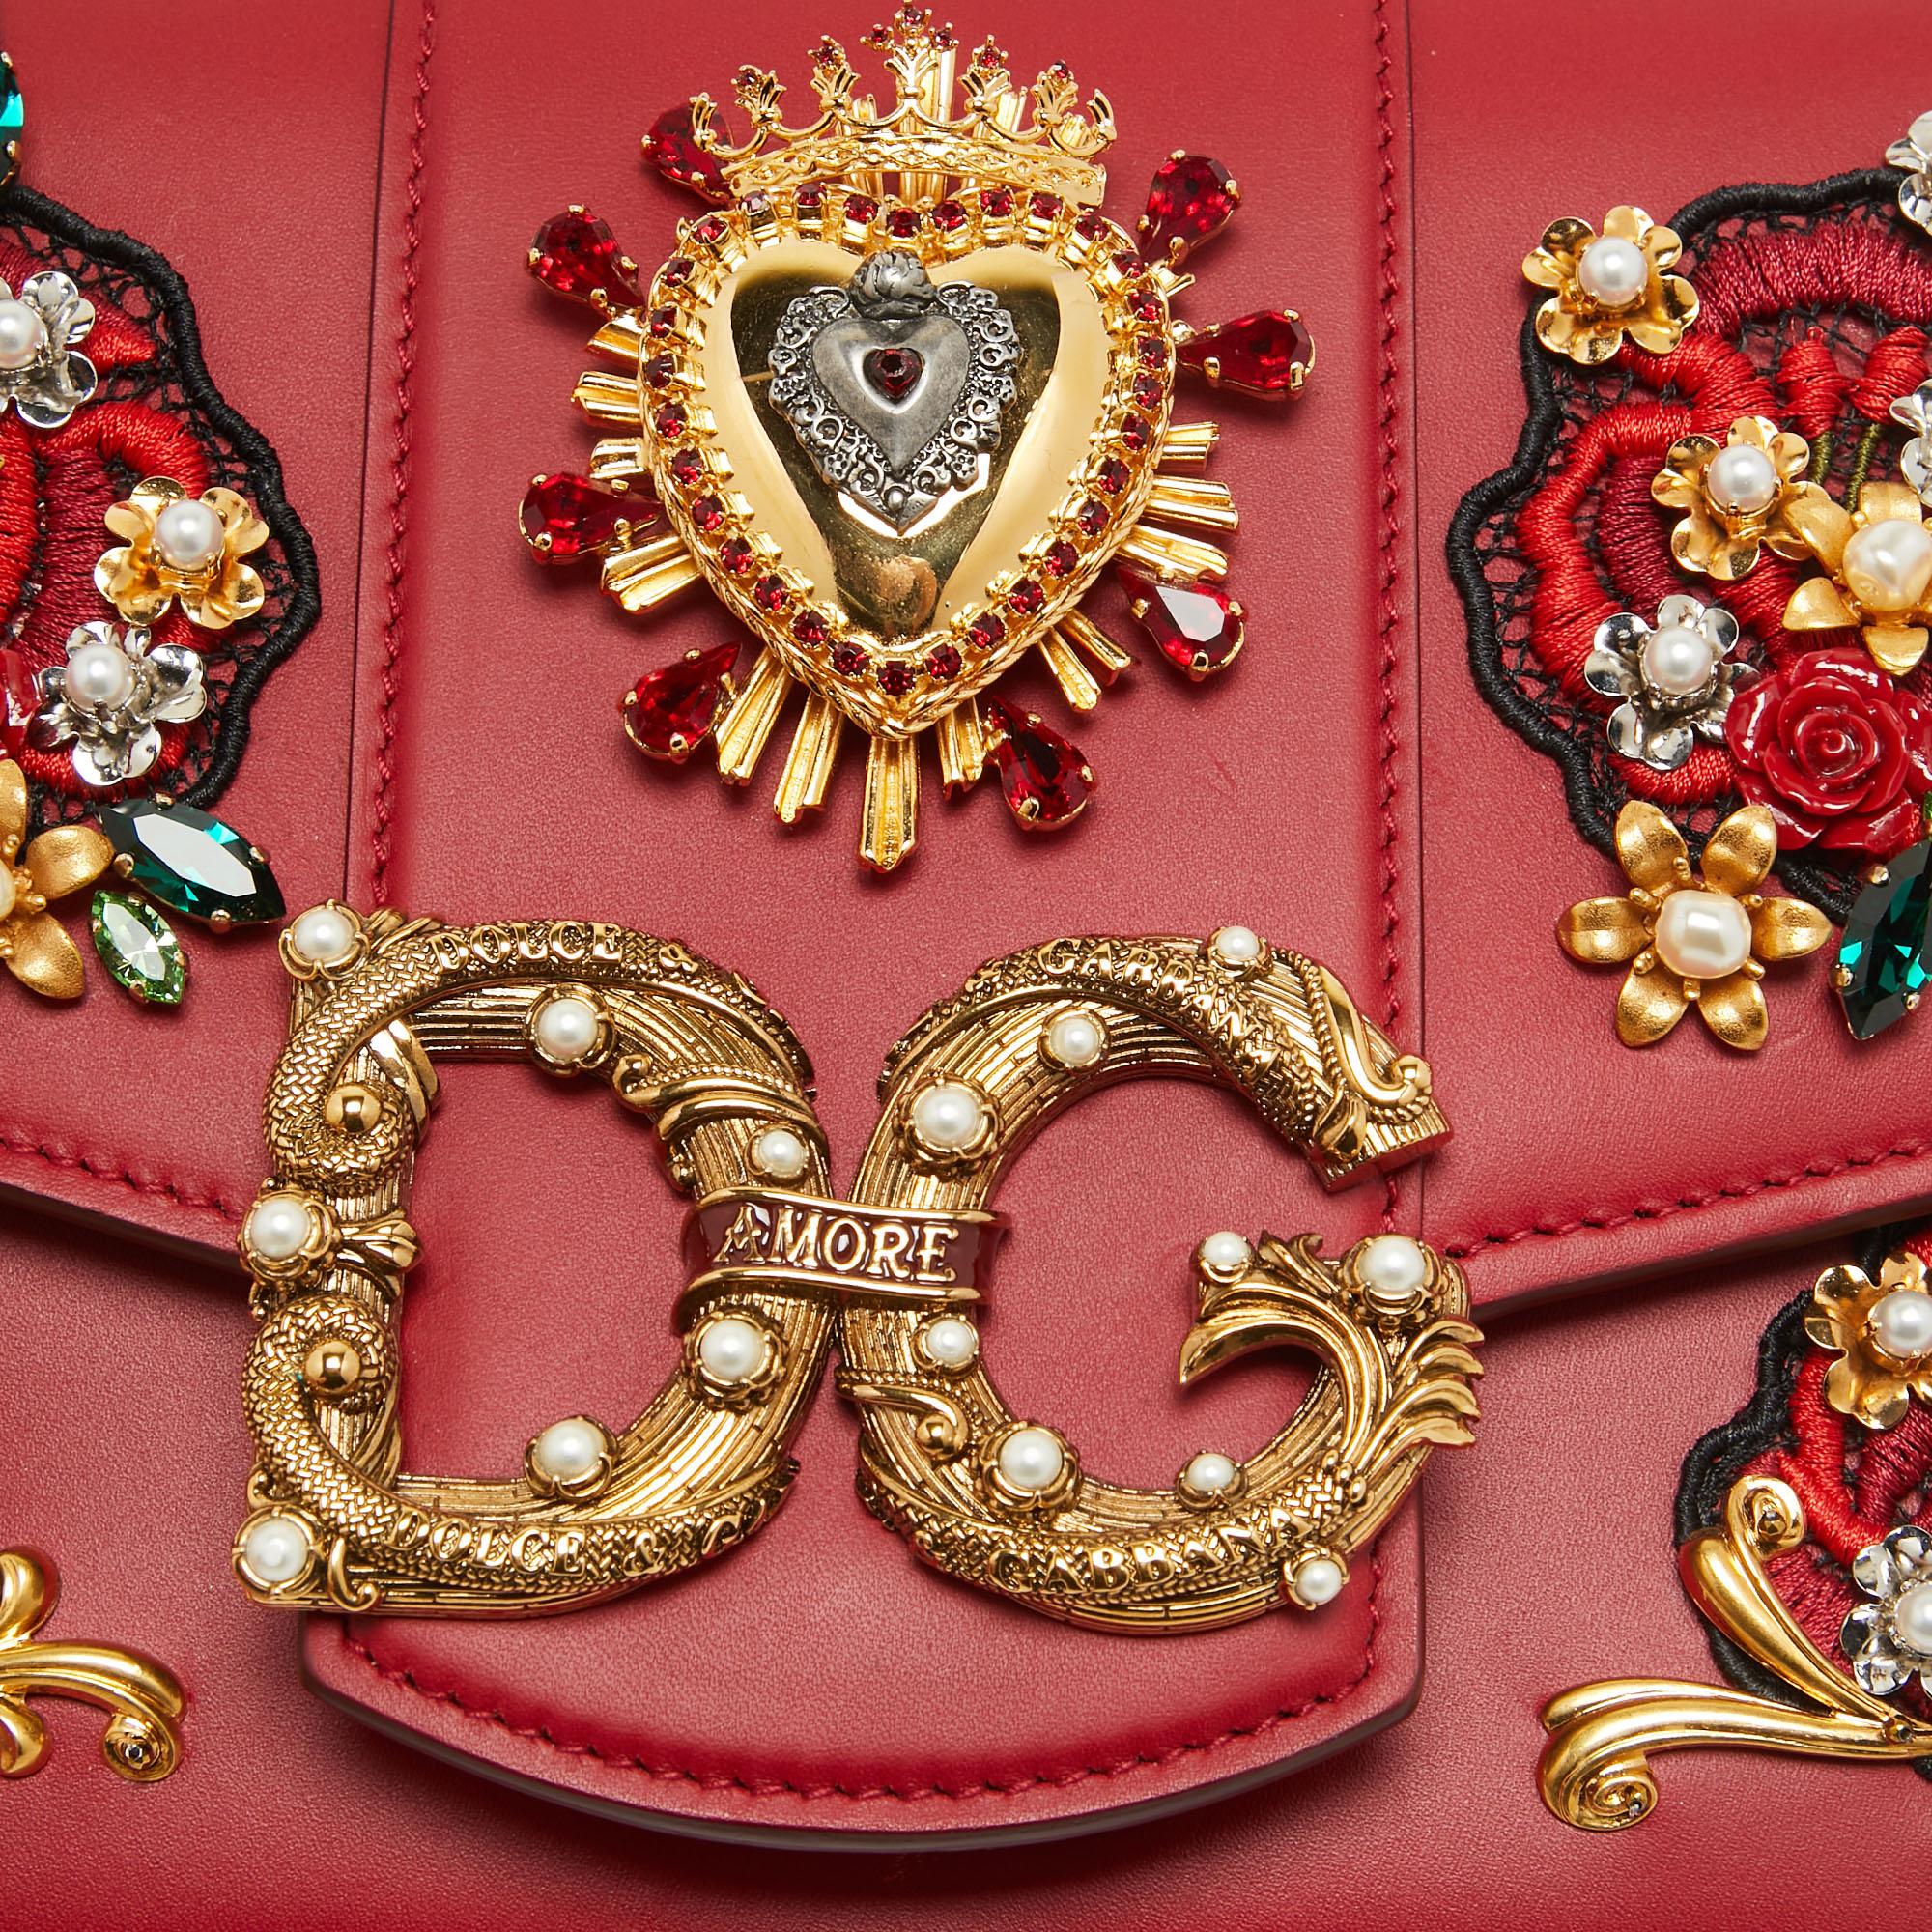 Dolce & Gabbana Red Leather DG Amore Crystals Top Handle Bag For Sale 3